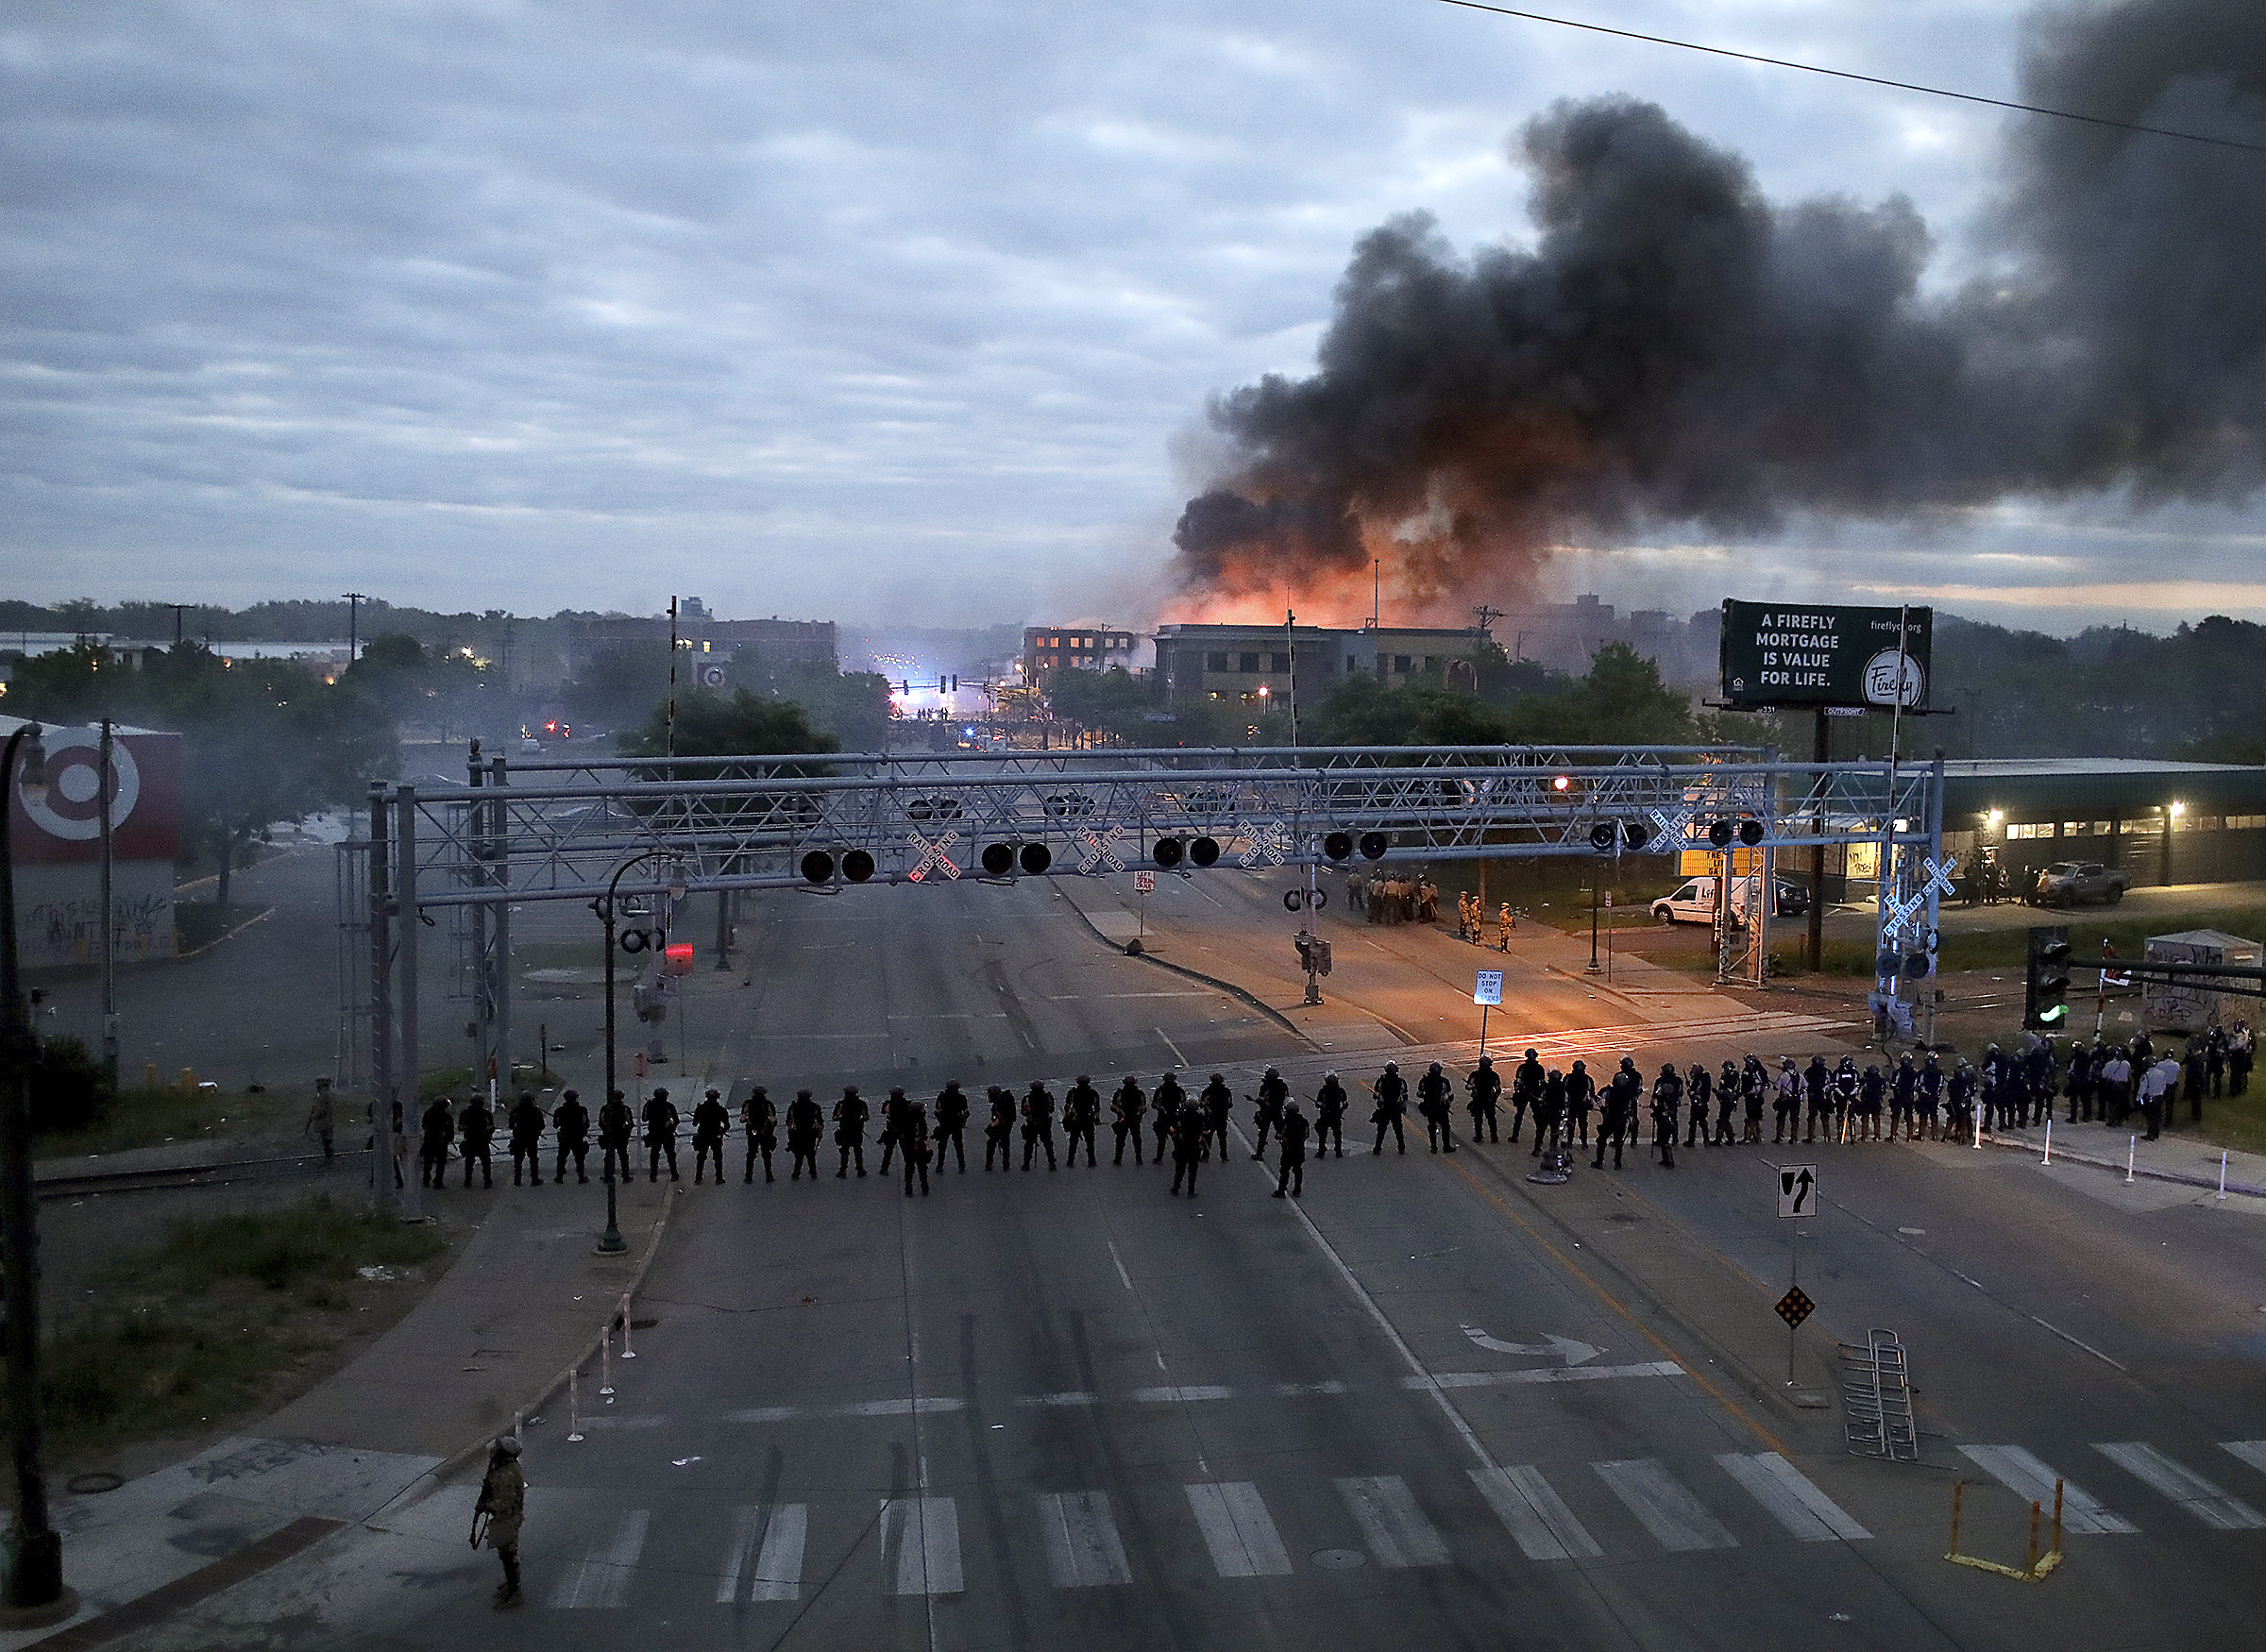 Law enforcement officers amassed along Lake Street near Hiawatha Avenue as fires burned after a night of unrest and protests in Minneapolis on May 29. (David Joles—Star Tribune/AP)